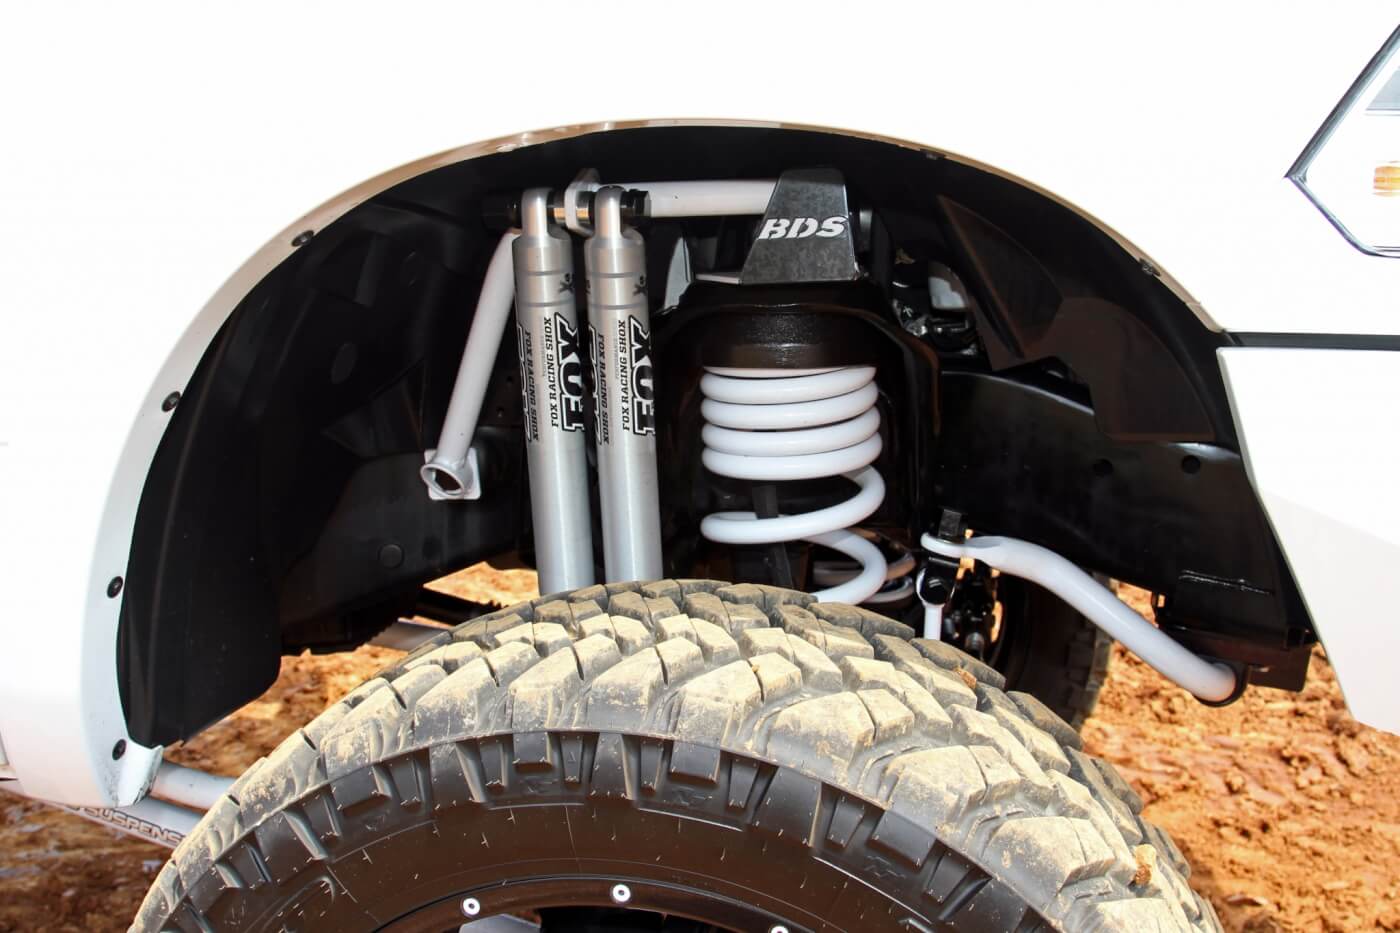 Dual Fox Racing Shox and massive BDS coil springs are used at the front corners of the Ram.